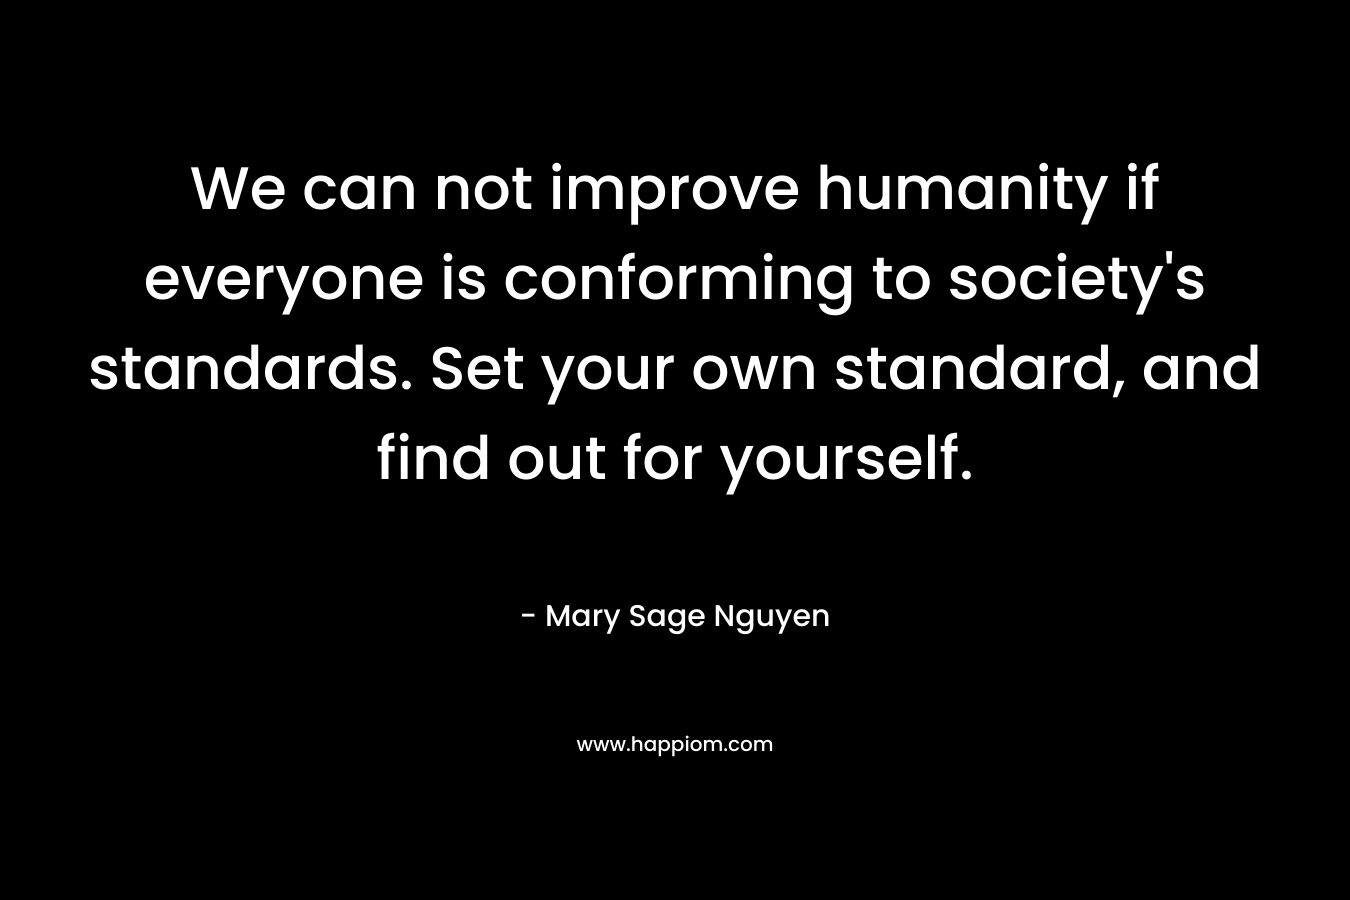 We can not improve humanity if everyone is conforming to society’s standards. Set your own standard, and find out for yourself. – Mary Sage Nguyen